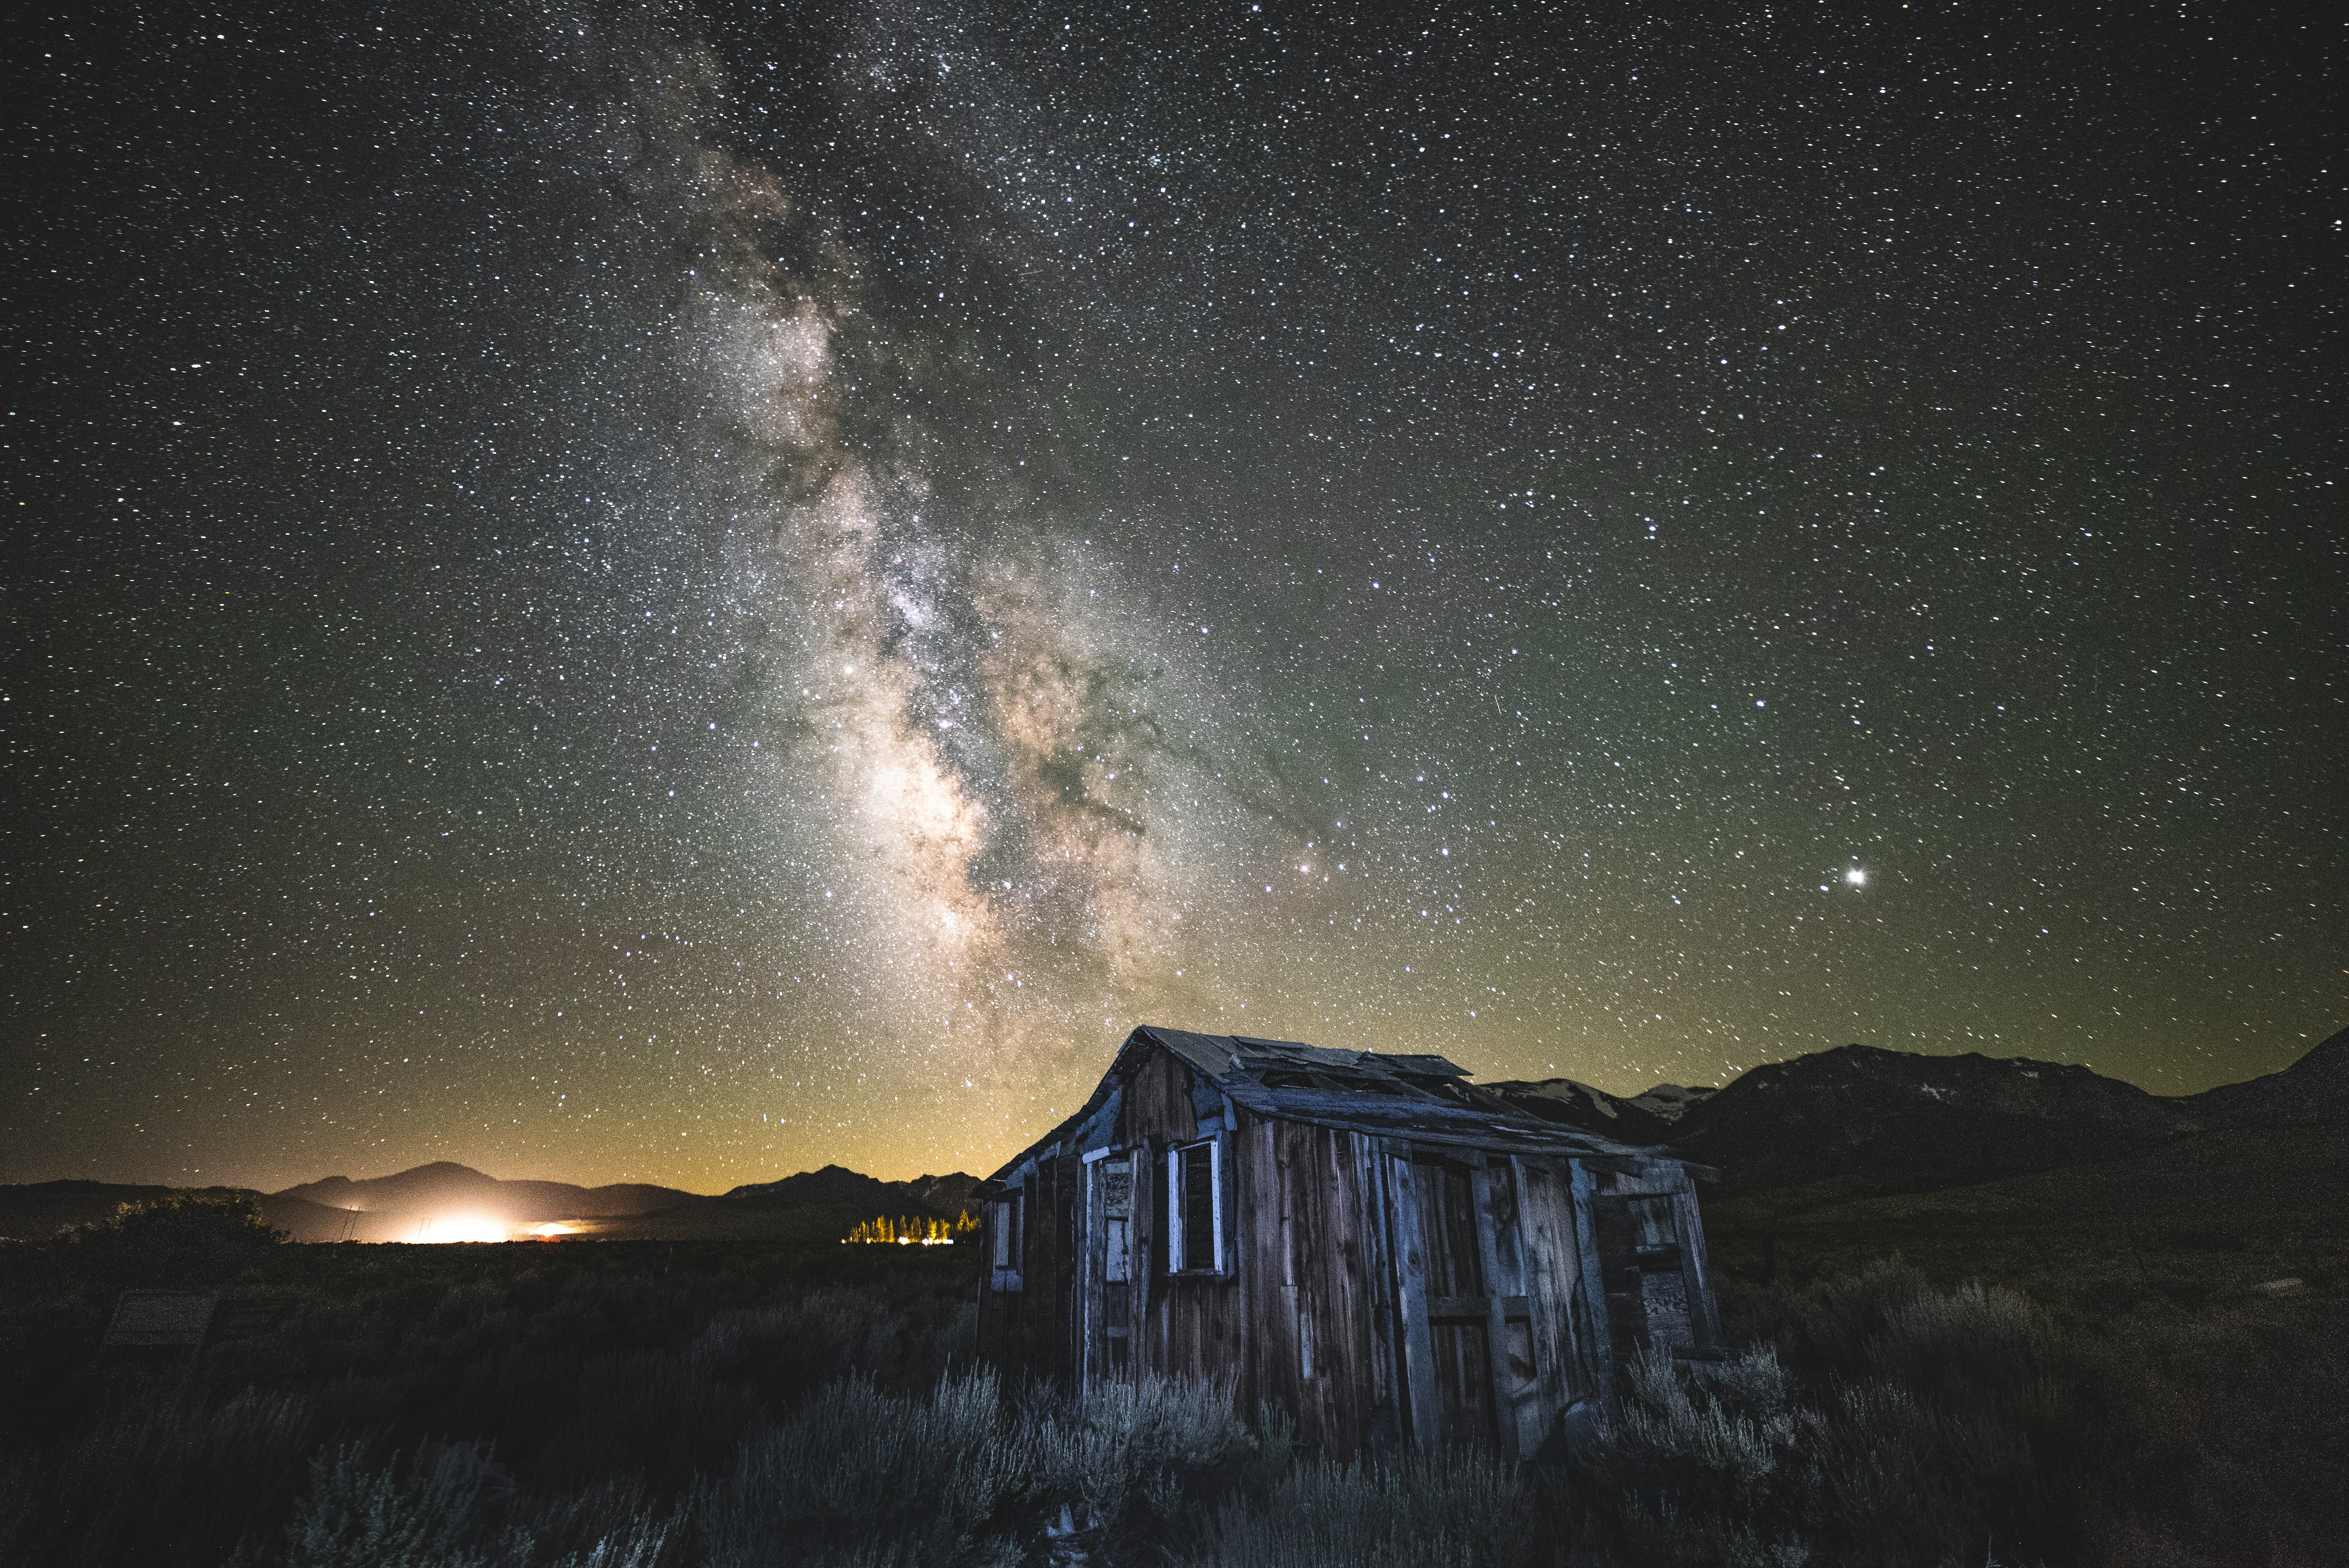 brown and gray wooden house under stars on sky during nighttime